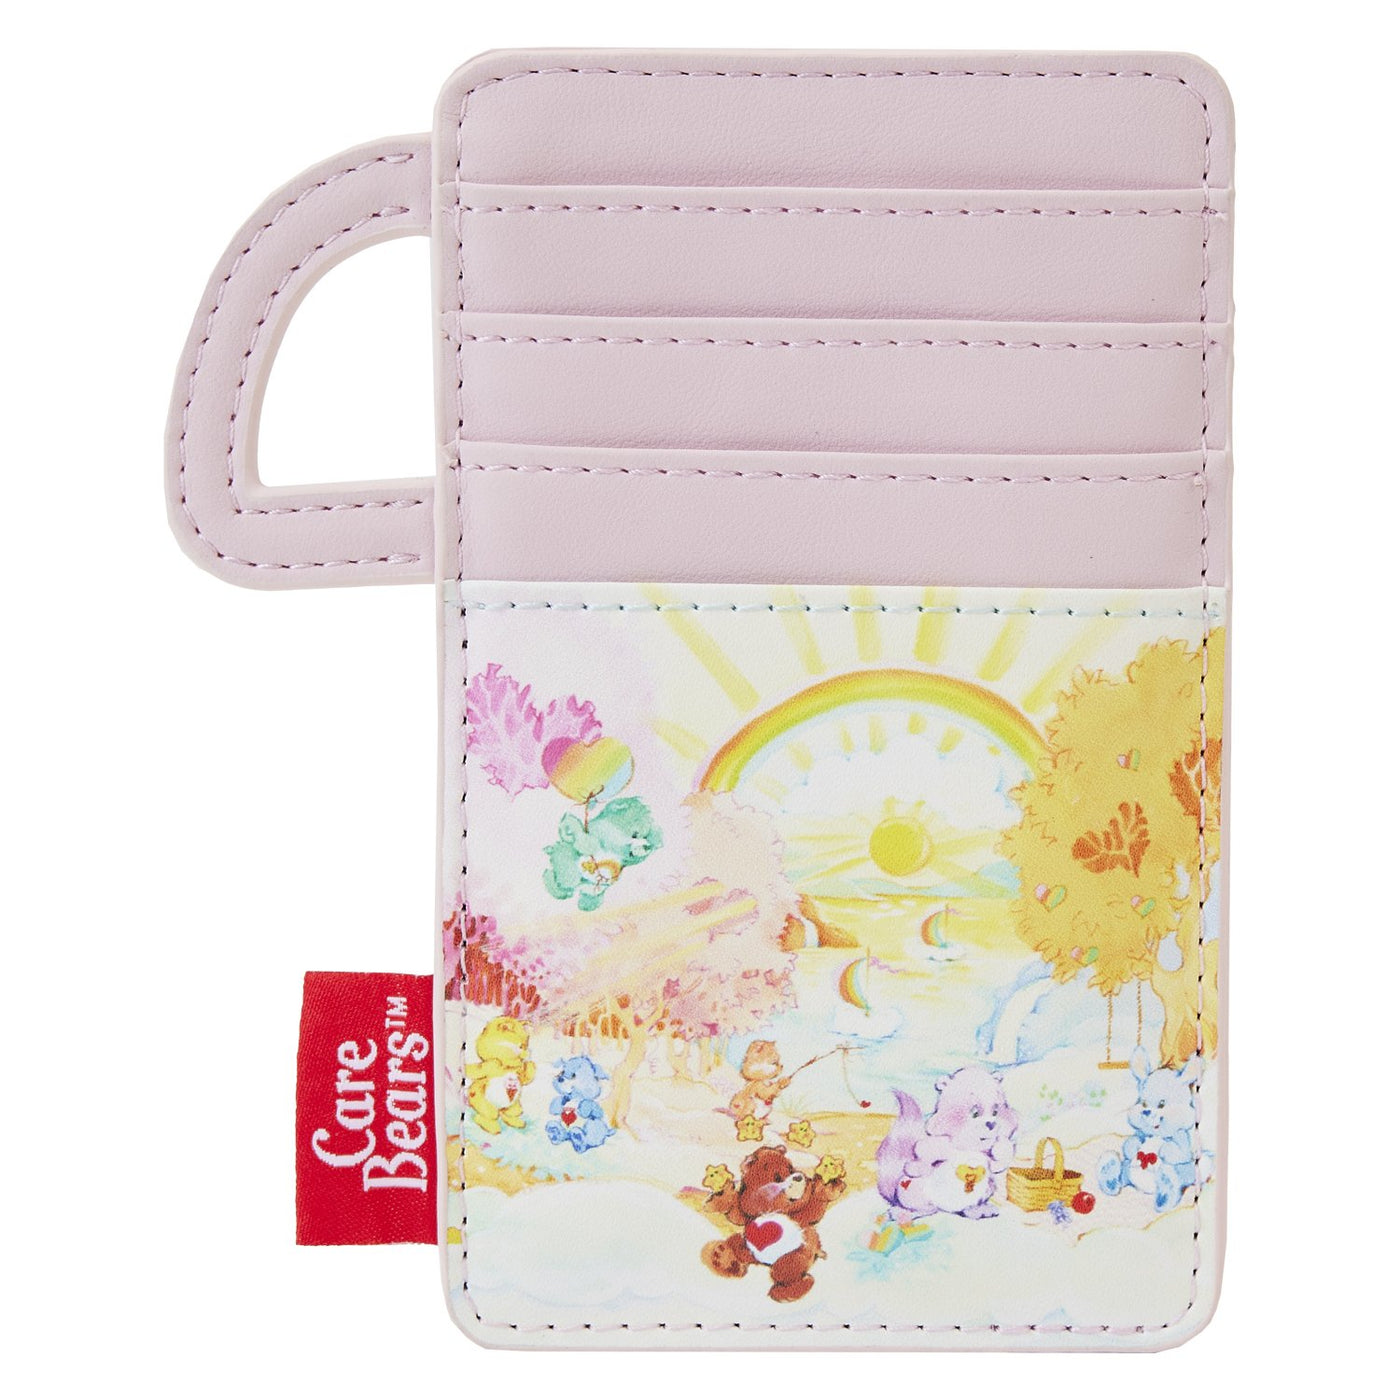 Loungefly Care Bears and Cousins Cardholder - Front